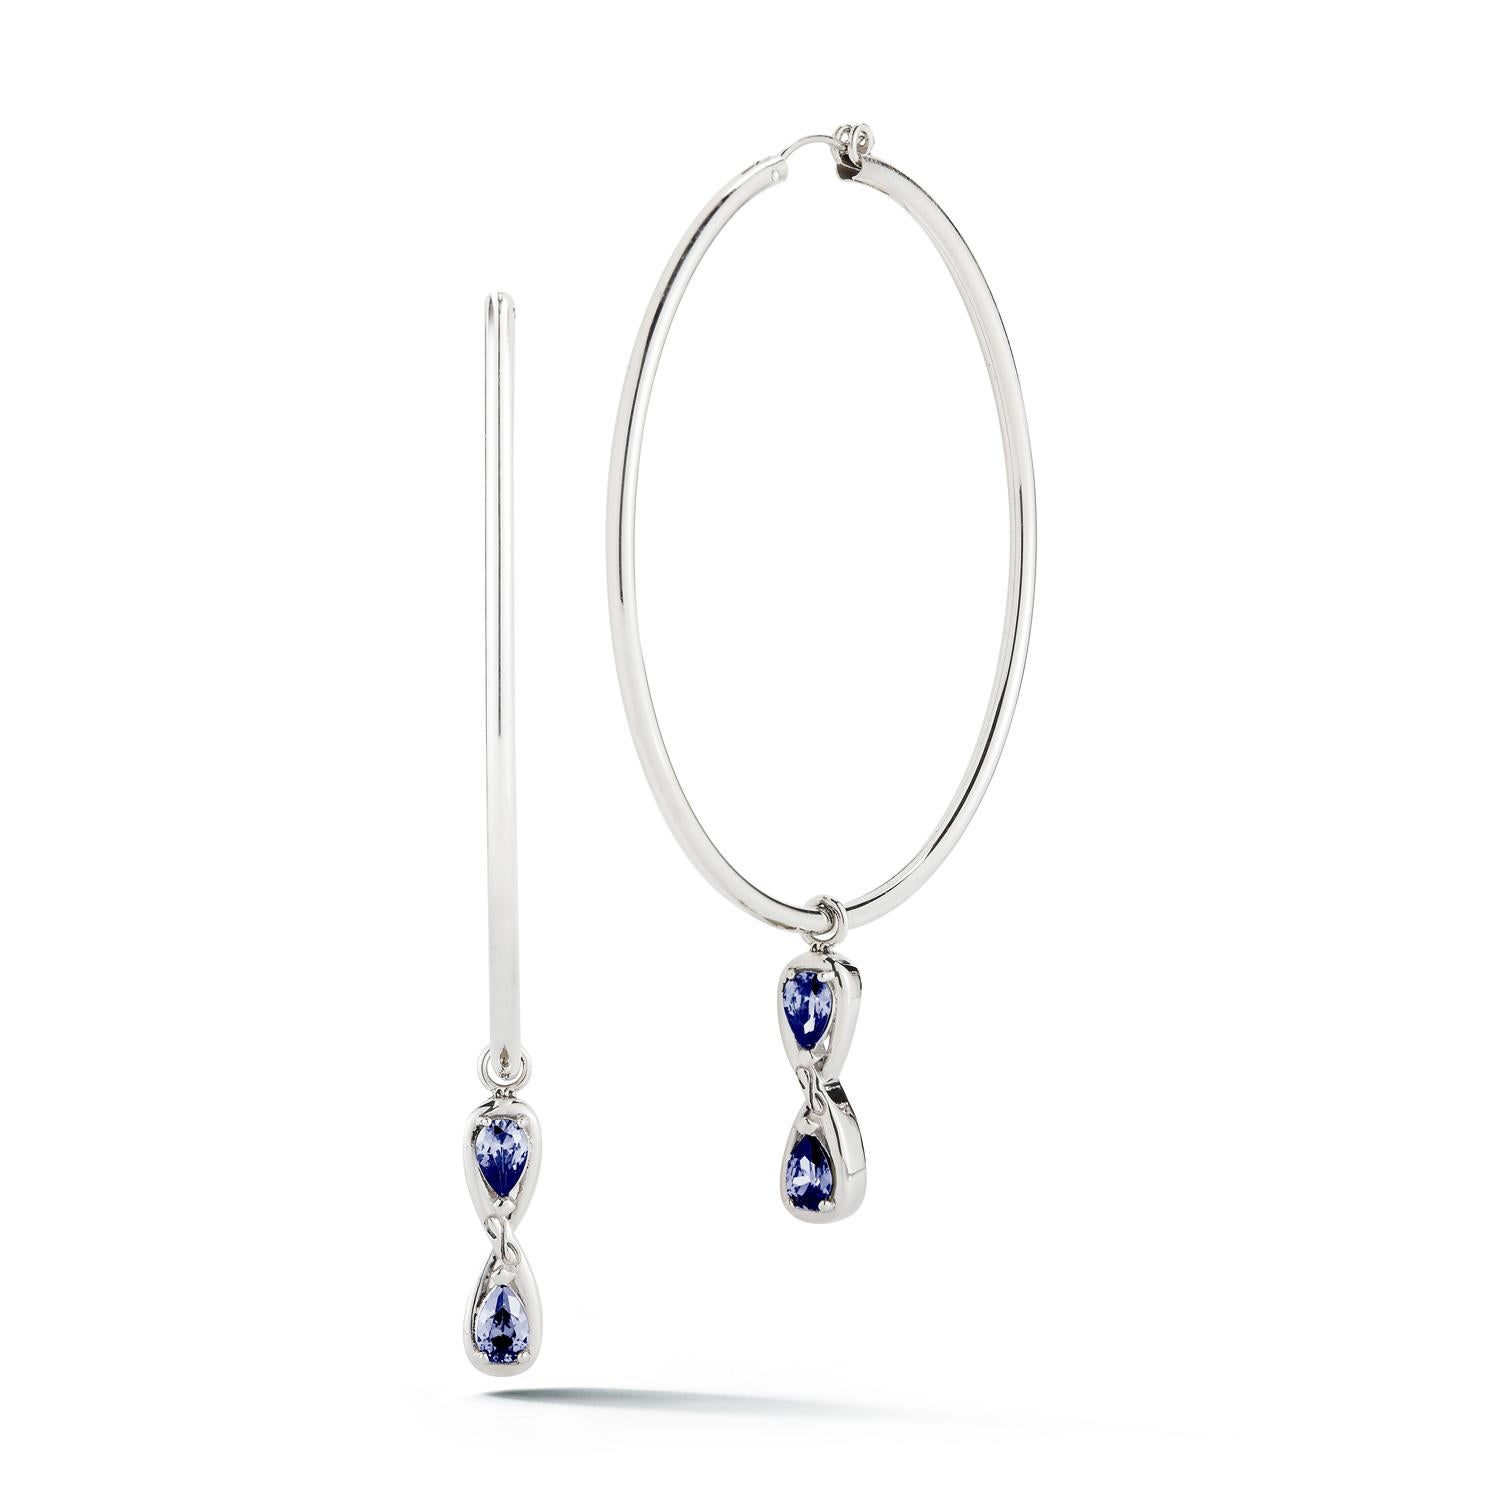 Designed in NYC

.925 Sterling Silver 6 x 4 mm White Topaz Infinity Stone Dangle Hoops. When it comes to self-expression, the style possibilities are endless. Infinity stone dangle hoops:

Sterling silver 
High-polish finish
Light-weight 
Light